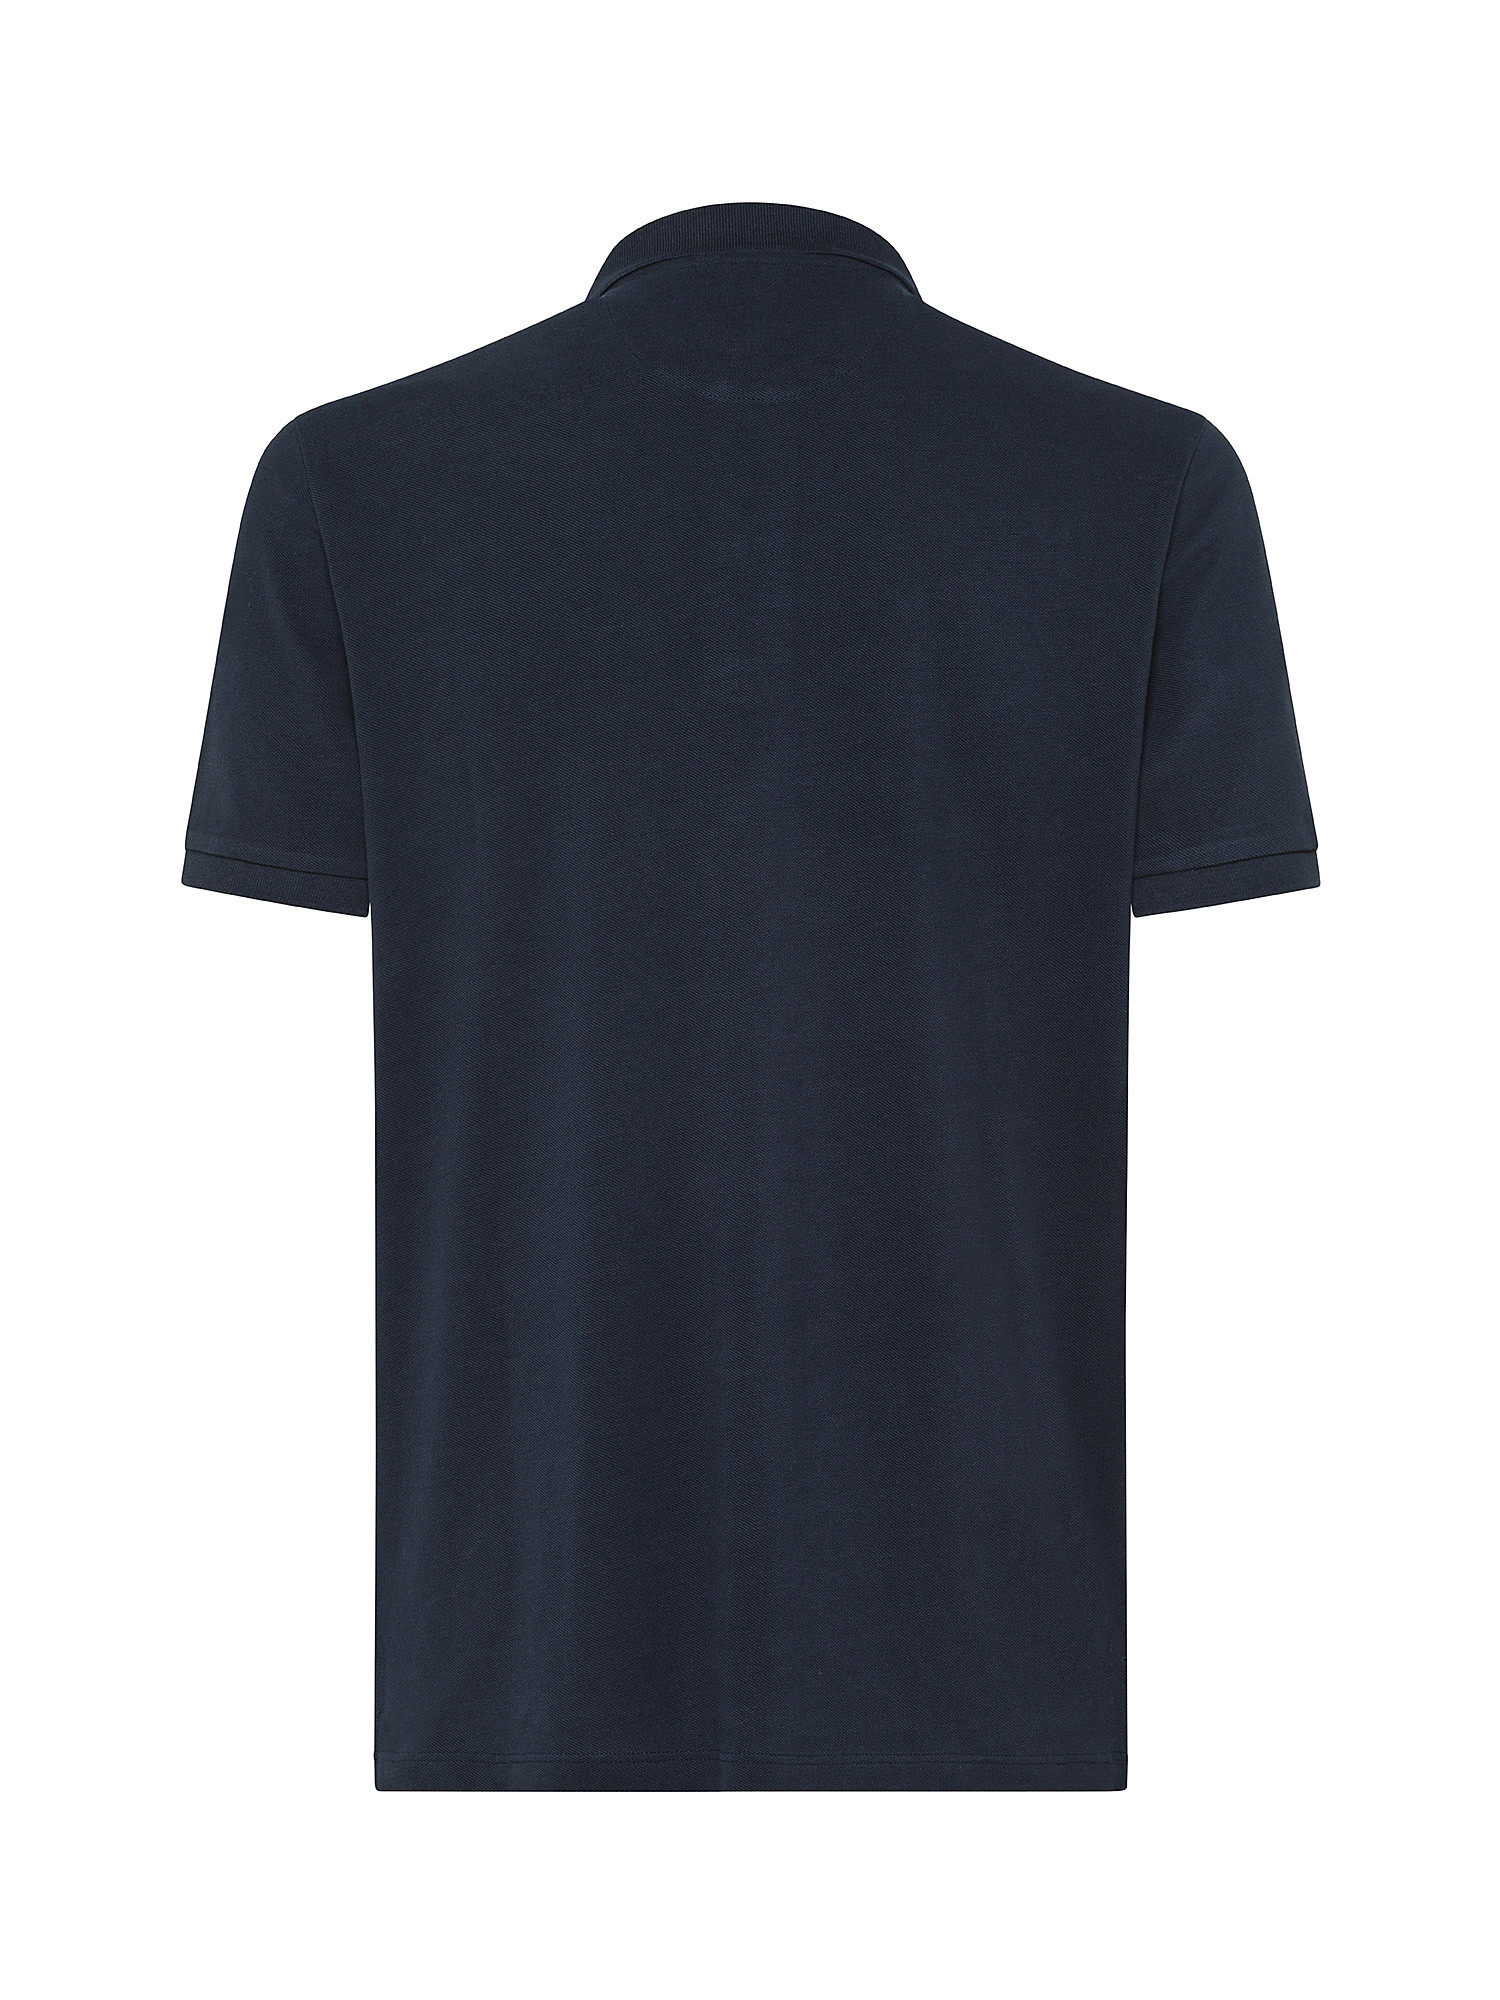 Luca D'Altieri - Polo in pure cotton, Dark Blue, large image number 1